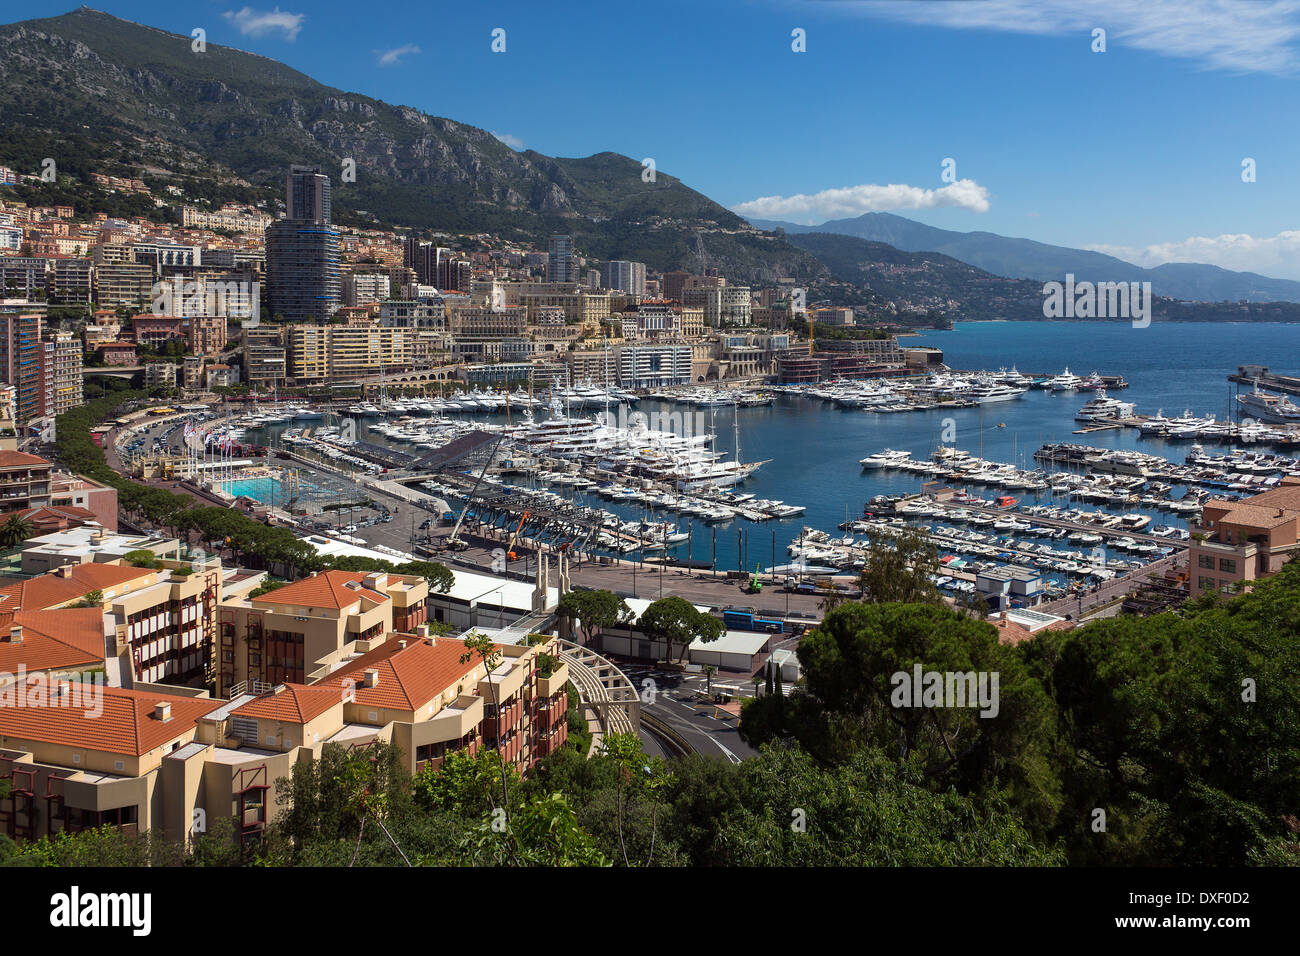 The Port of Monaco in the Principality of Monaco, a sovereign city state, located on the Cote d'Azur on the French Riviera. Stock Photo